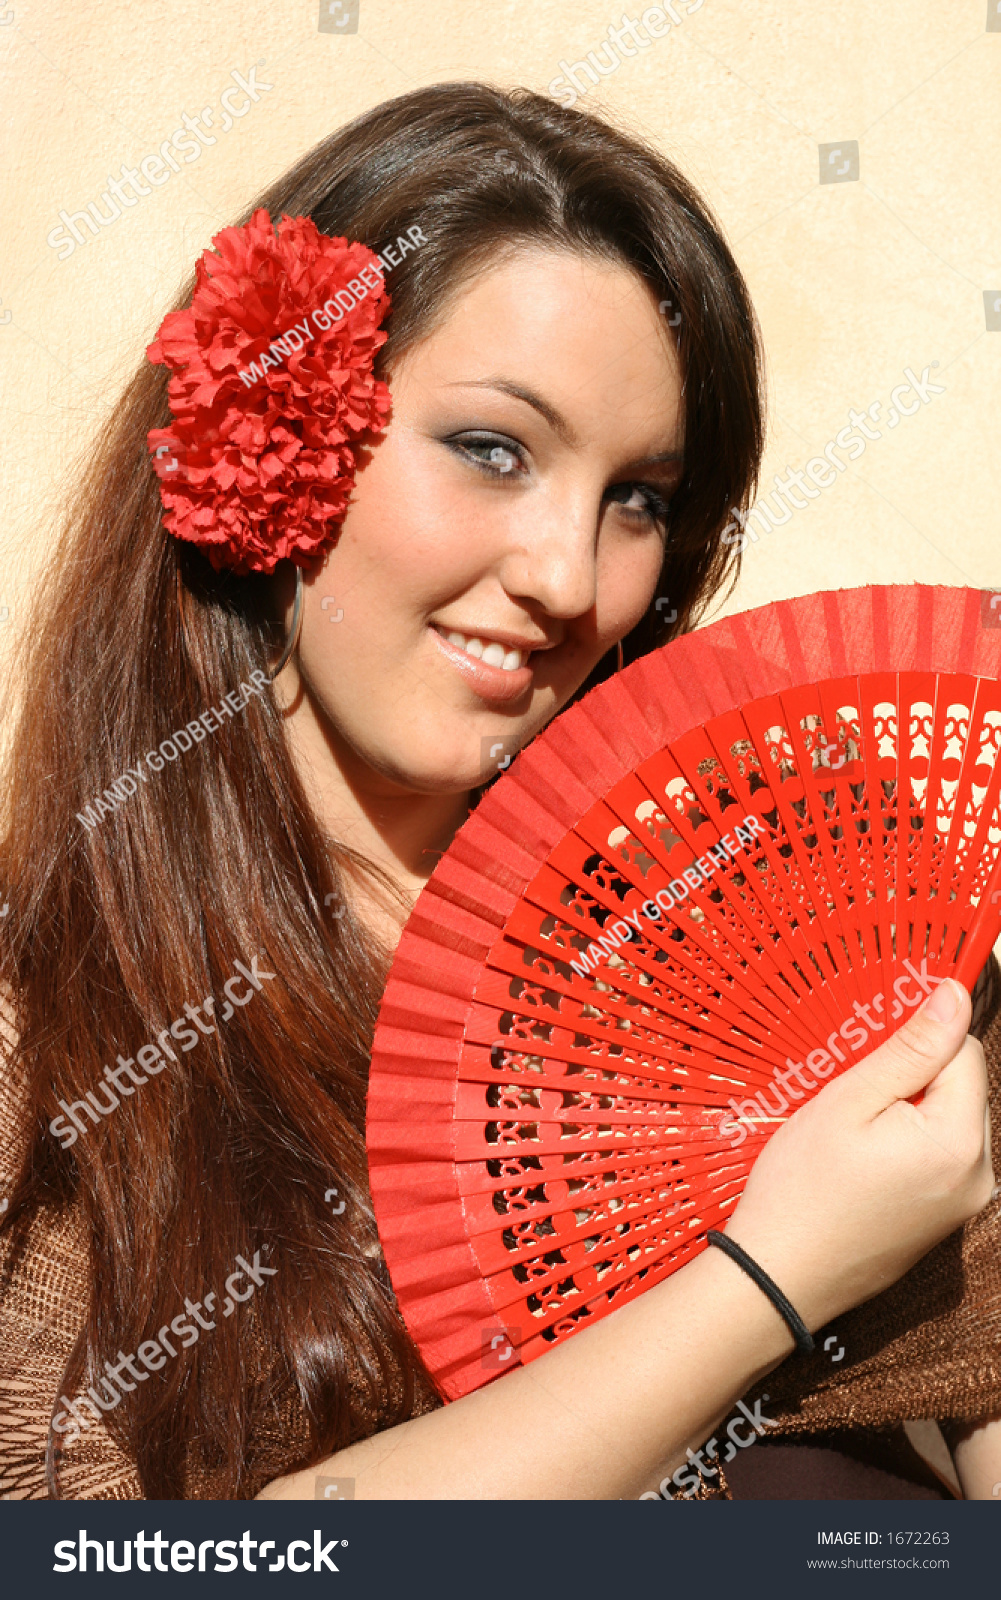 Young Spanish Woman With Red Fan. Stock Photo 1672263 ...